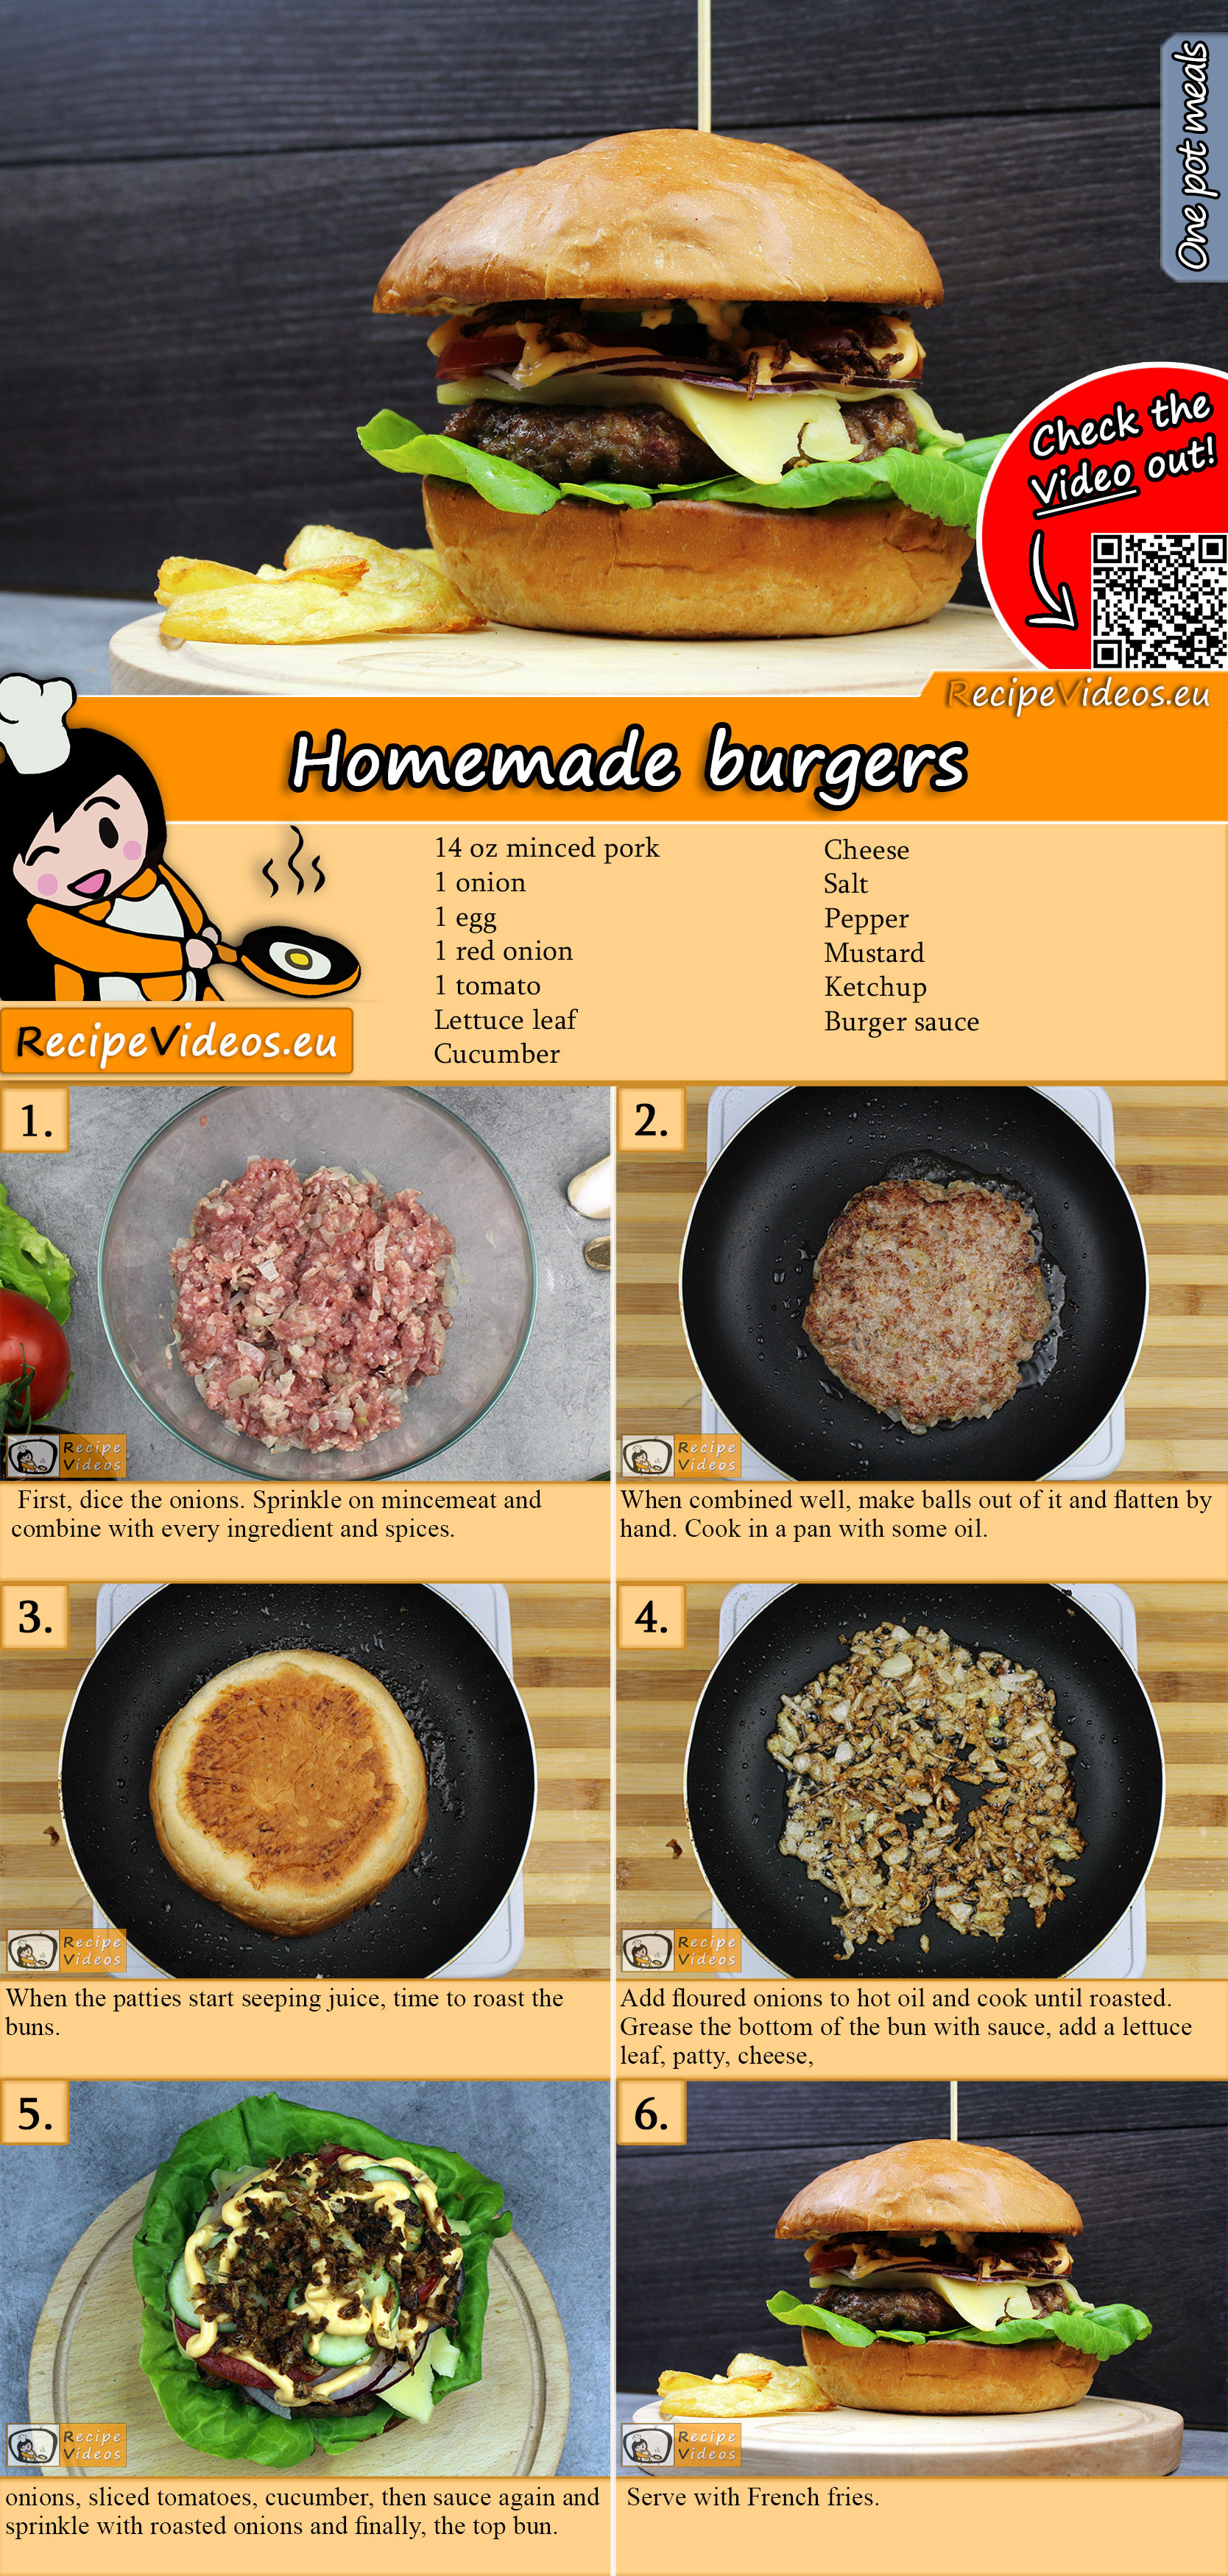 Homemade burgers recipe with video